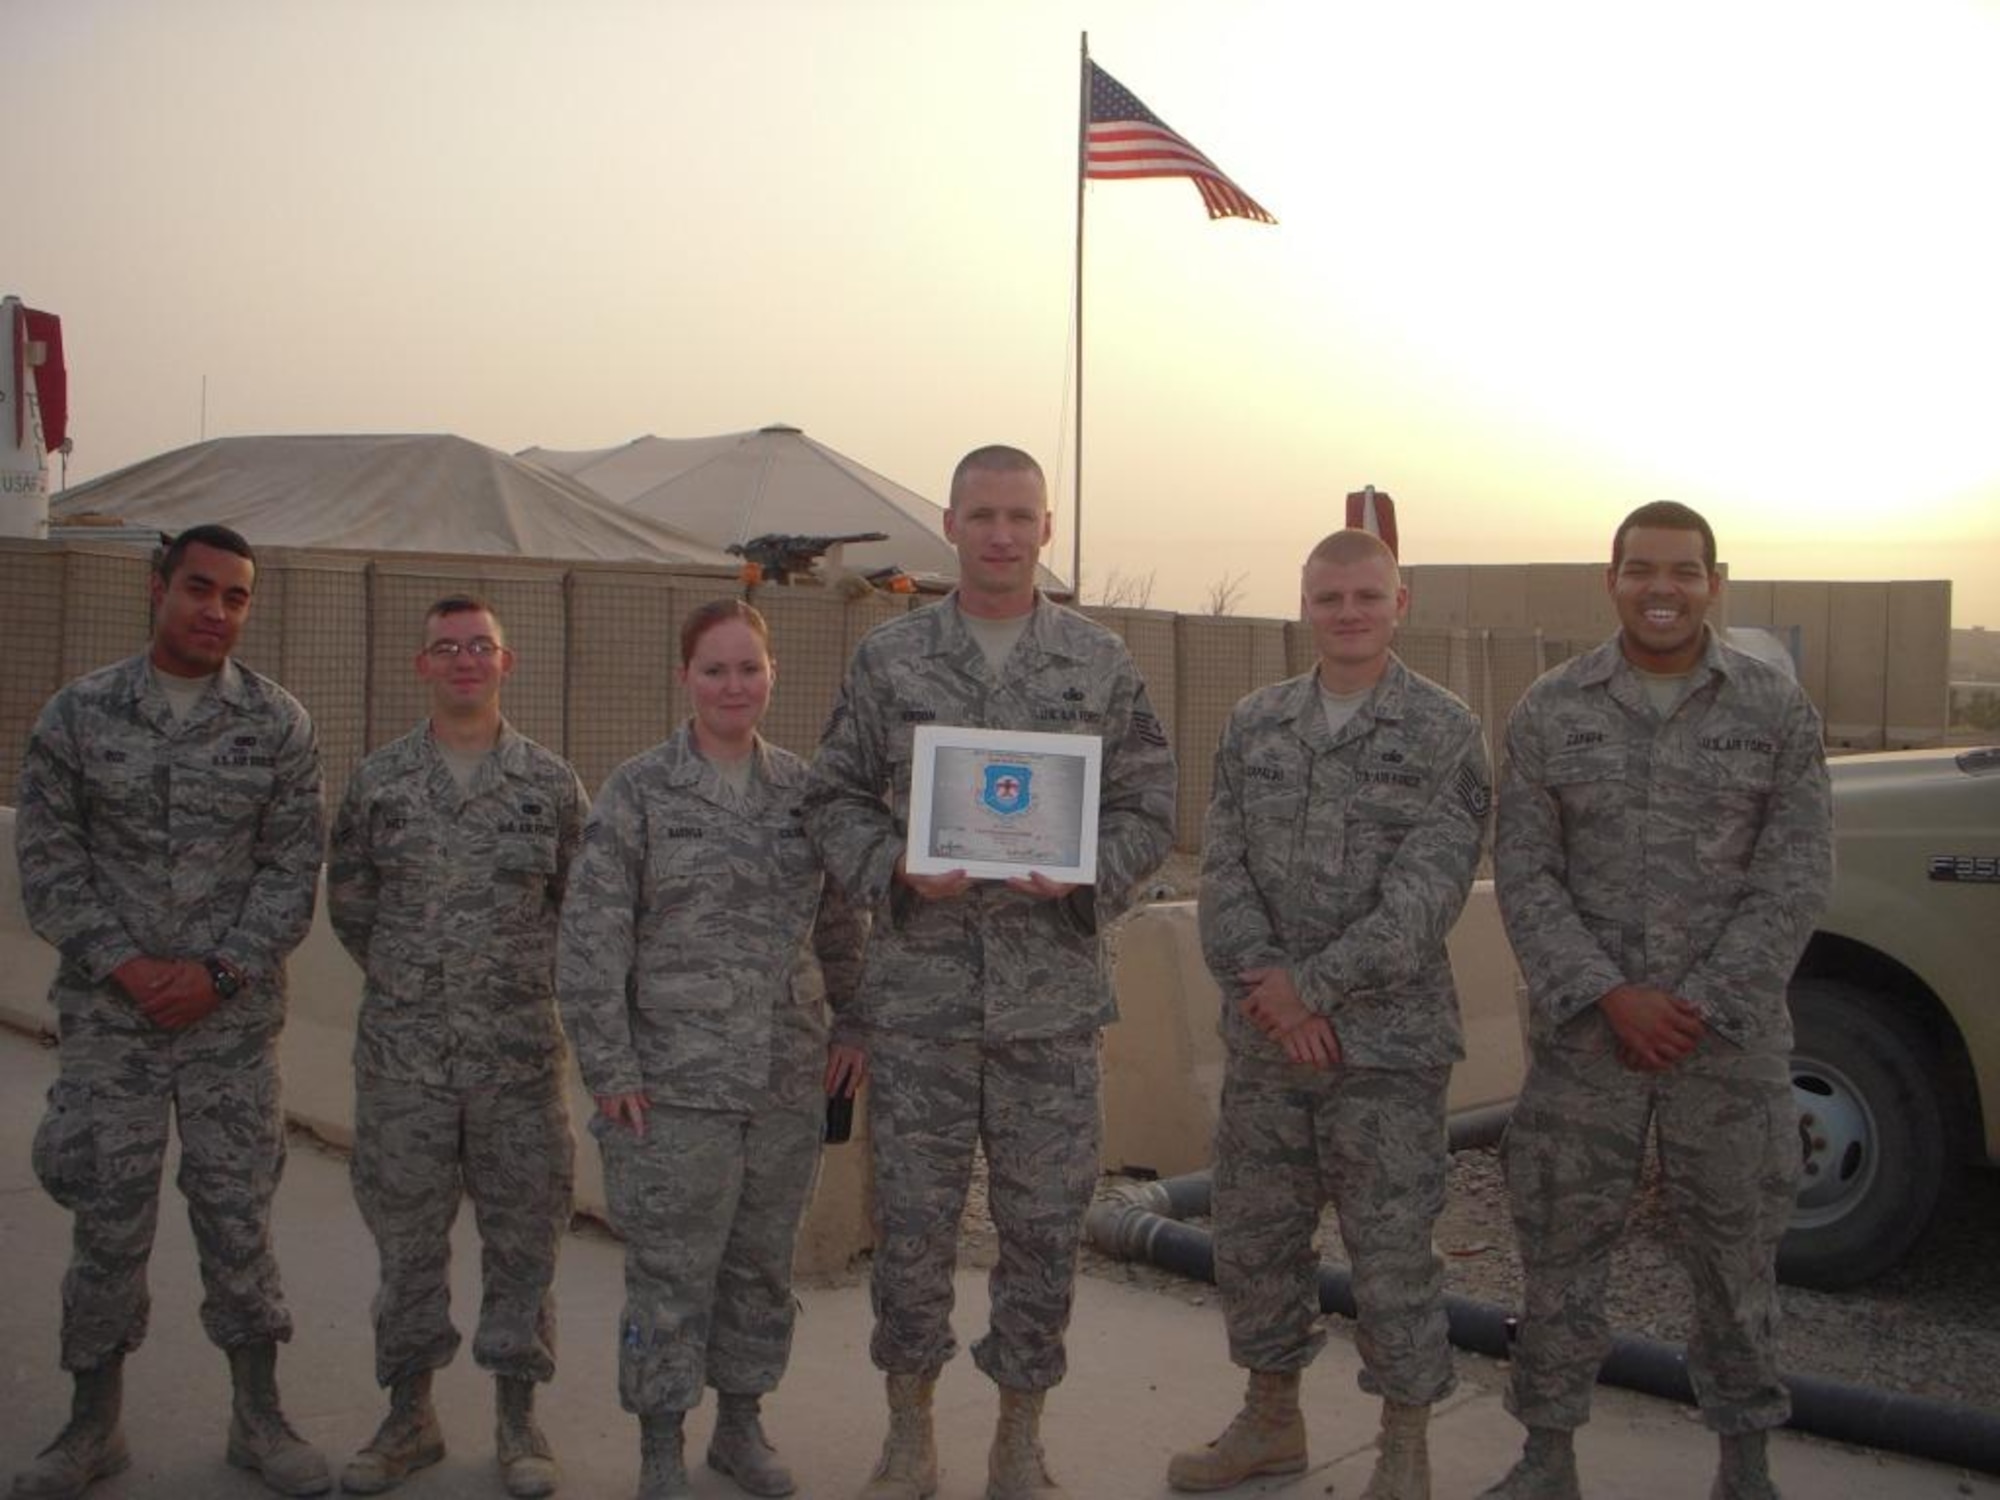 Deployed members of the 36th Logistical Readiness Squadron, currently stationed in Iraq, pose after winning Team of the Month at Army Contingency Operating Base Adder in September. The Expeditionary LRS members beat out civil engineer, contracting and security forces units to earn top honors. The Airmen exceeded Air Force standards for output by 37 percent providing fuels support to 223 area of responsibility aircraft and issuing more than 50,000 gallons of fuel at an average response time of just 19 minutes. (U. S. Air Force Courtesy Photo)